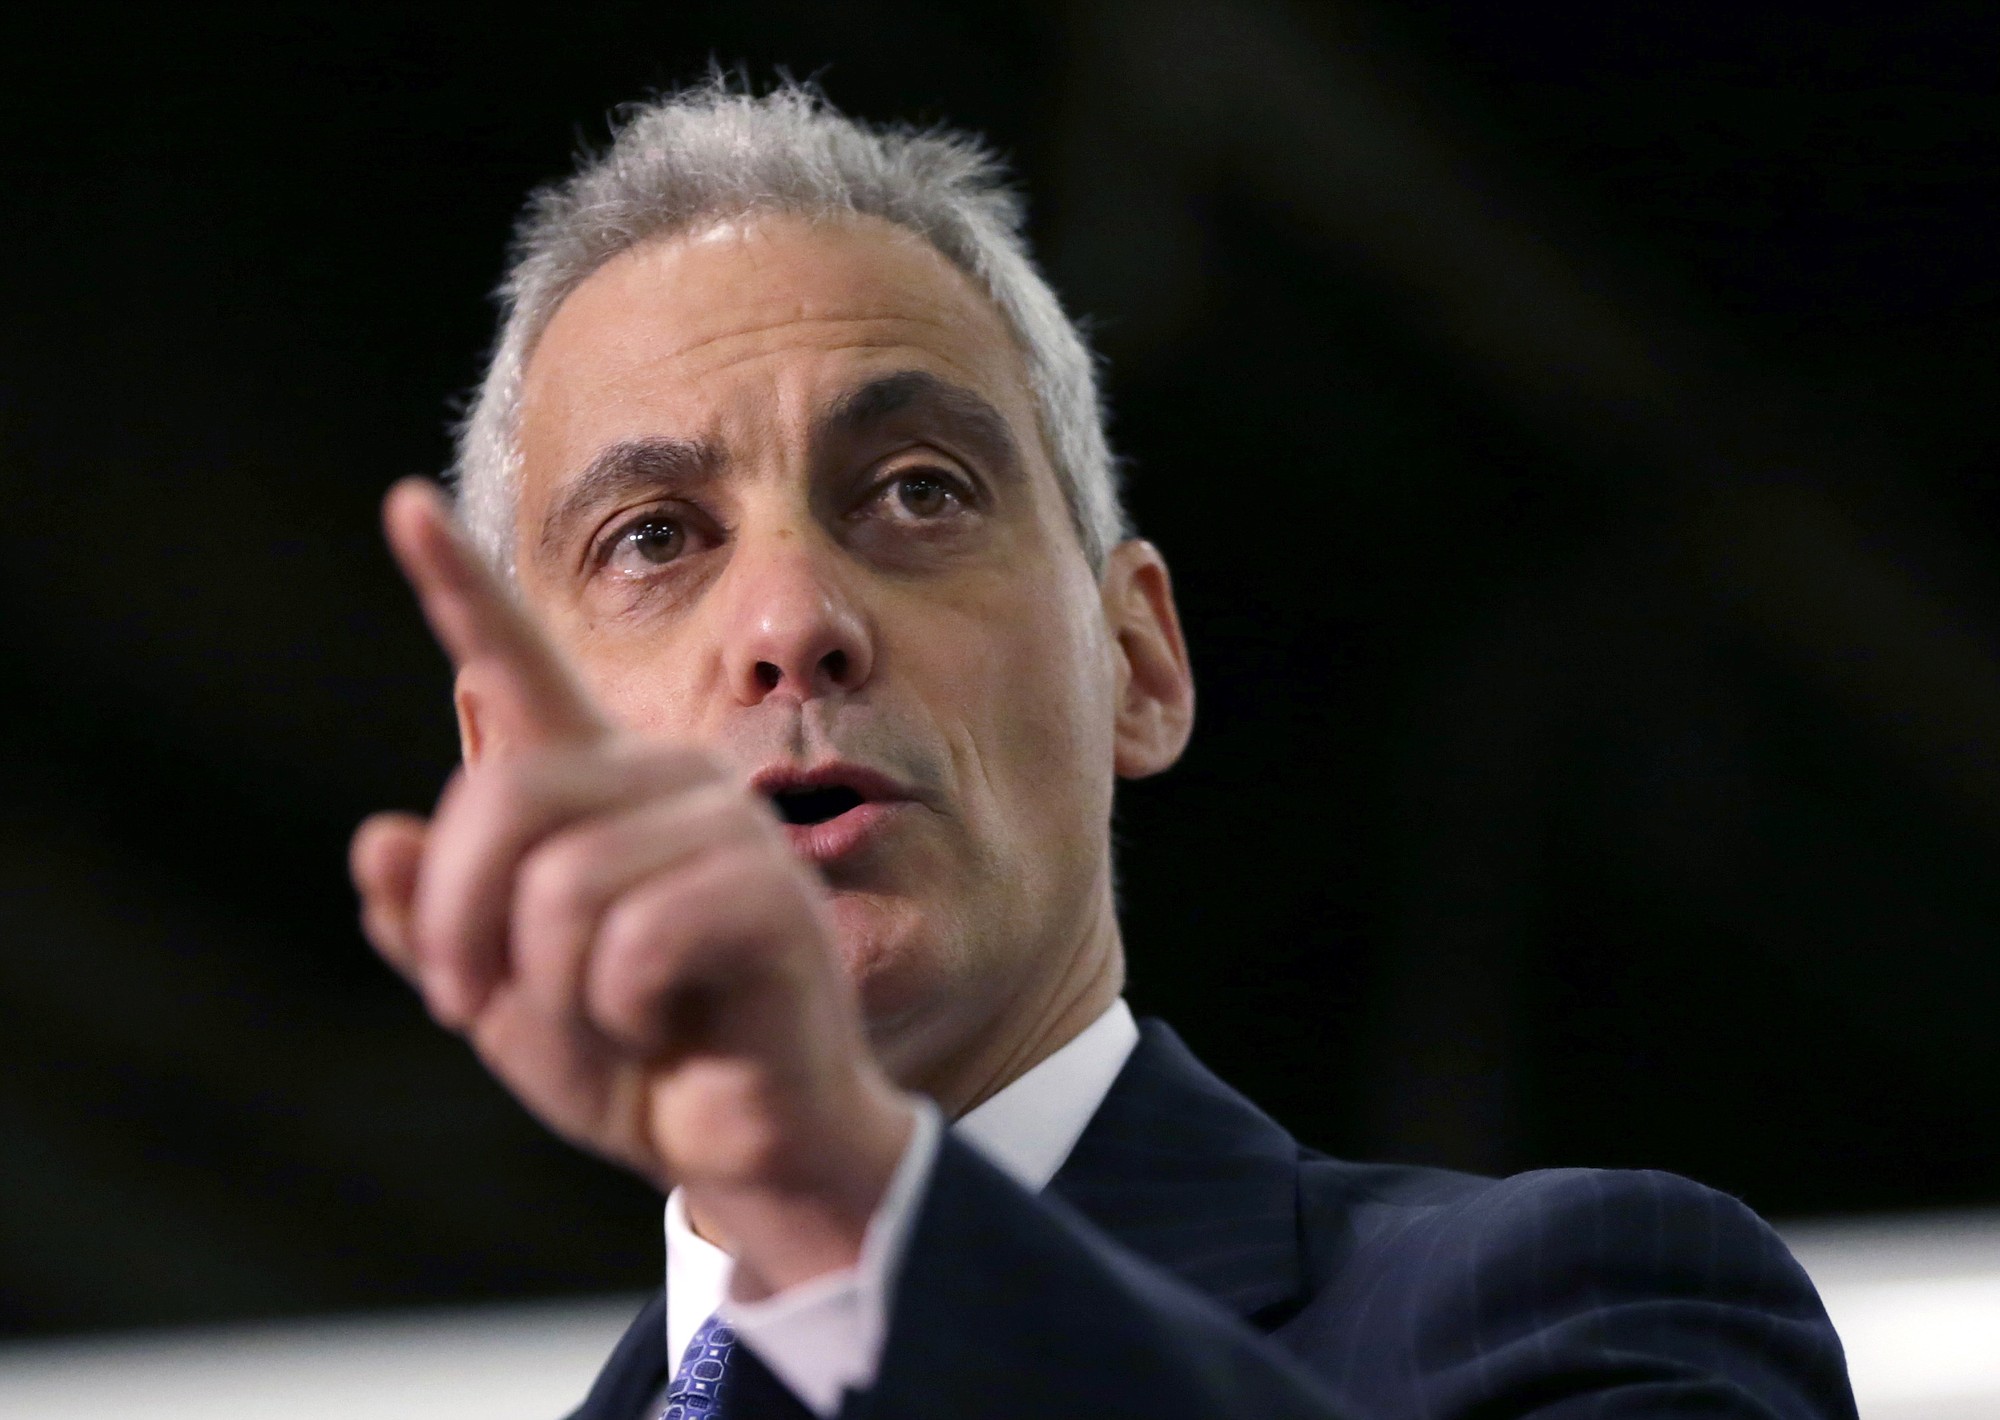 Chicago Mayor Rahm Emanuel, President Obama's former chief of staff, proposed an ordinance this week that would allow a presidential library to be built on public park land.